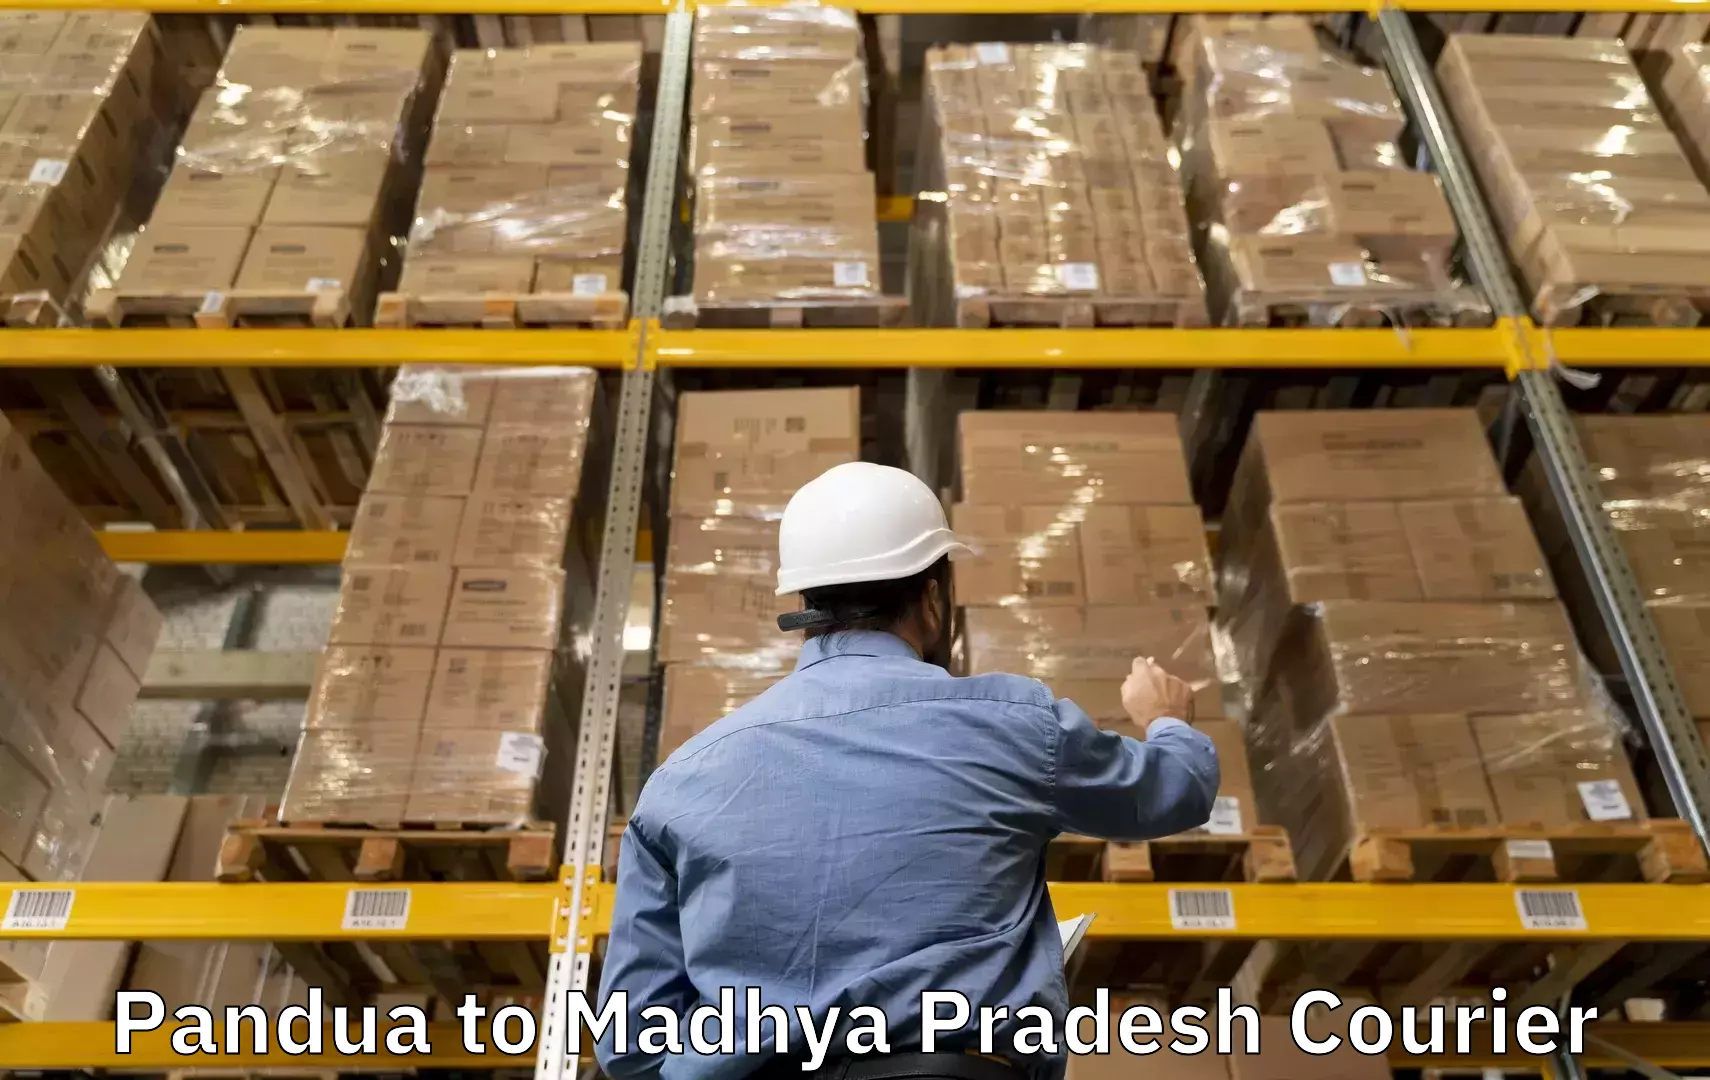 Excess baggage transport in Pandua to Gwalior